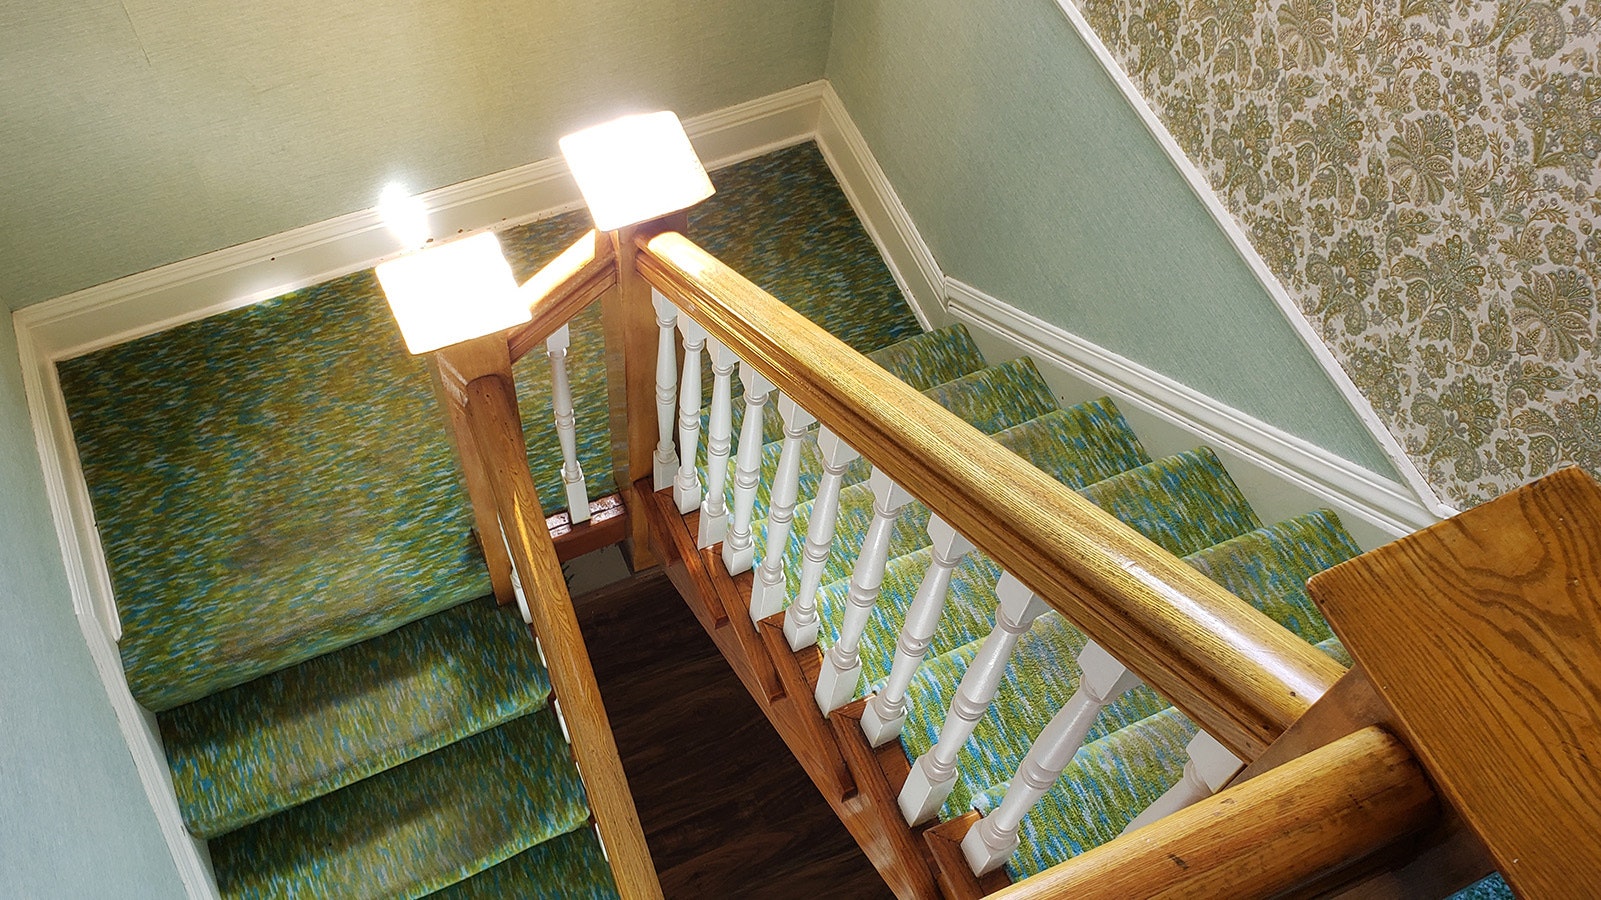 One of two stairwells leading downstairs at the J.B. Okie Mansion.